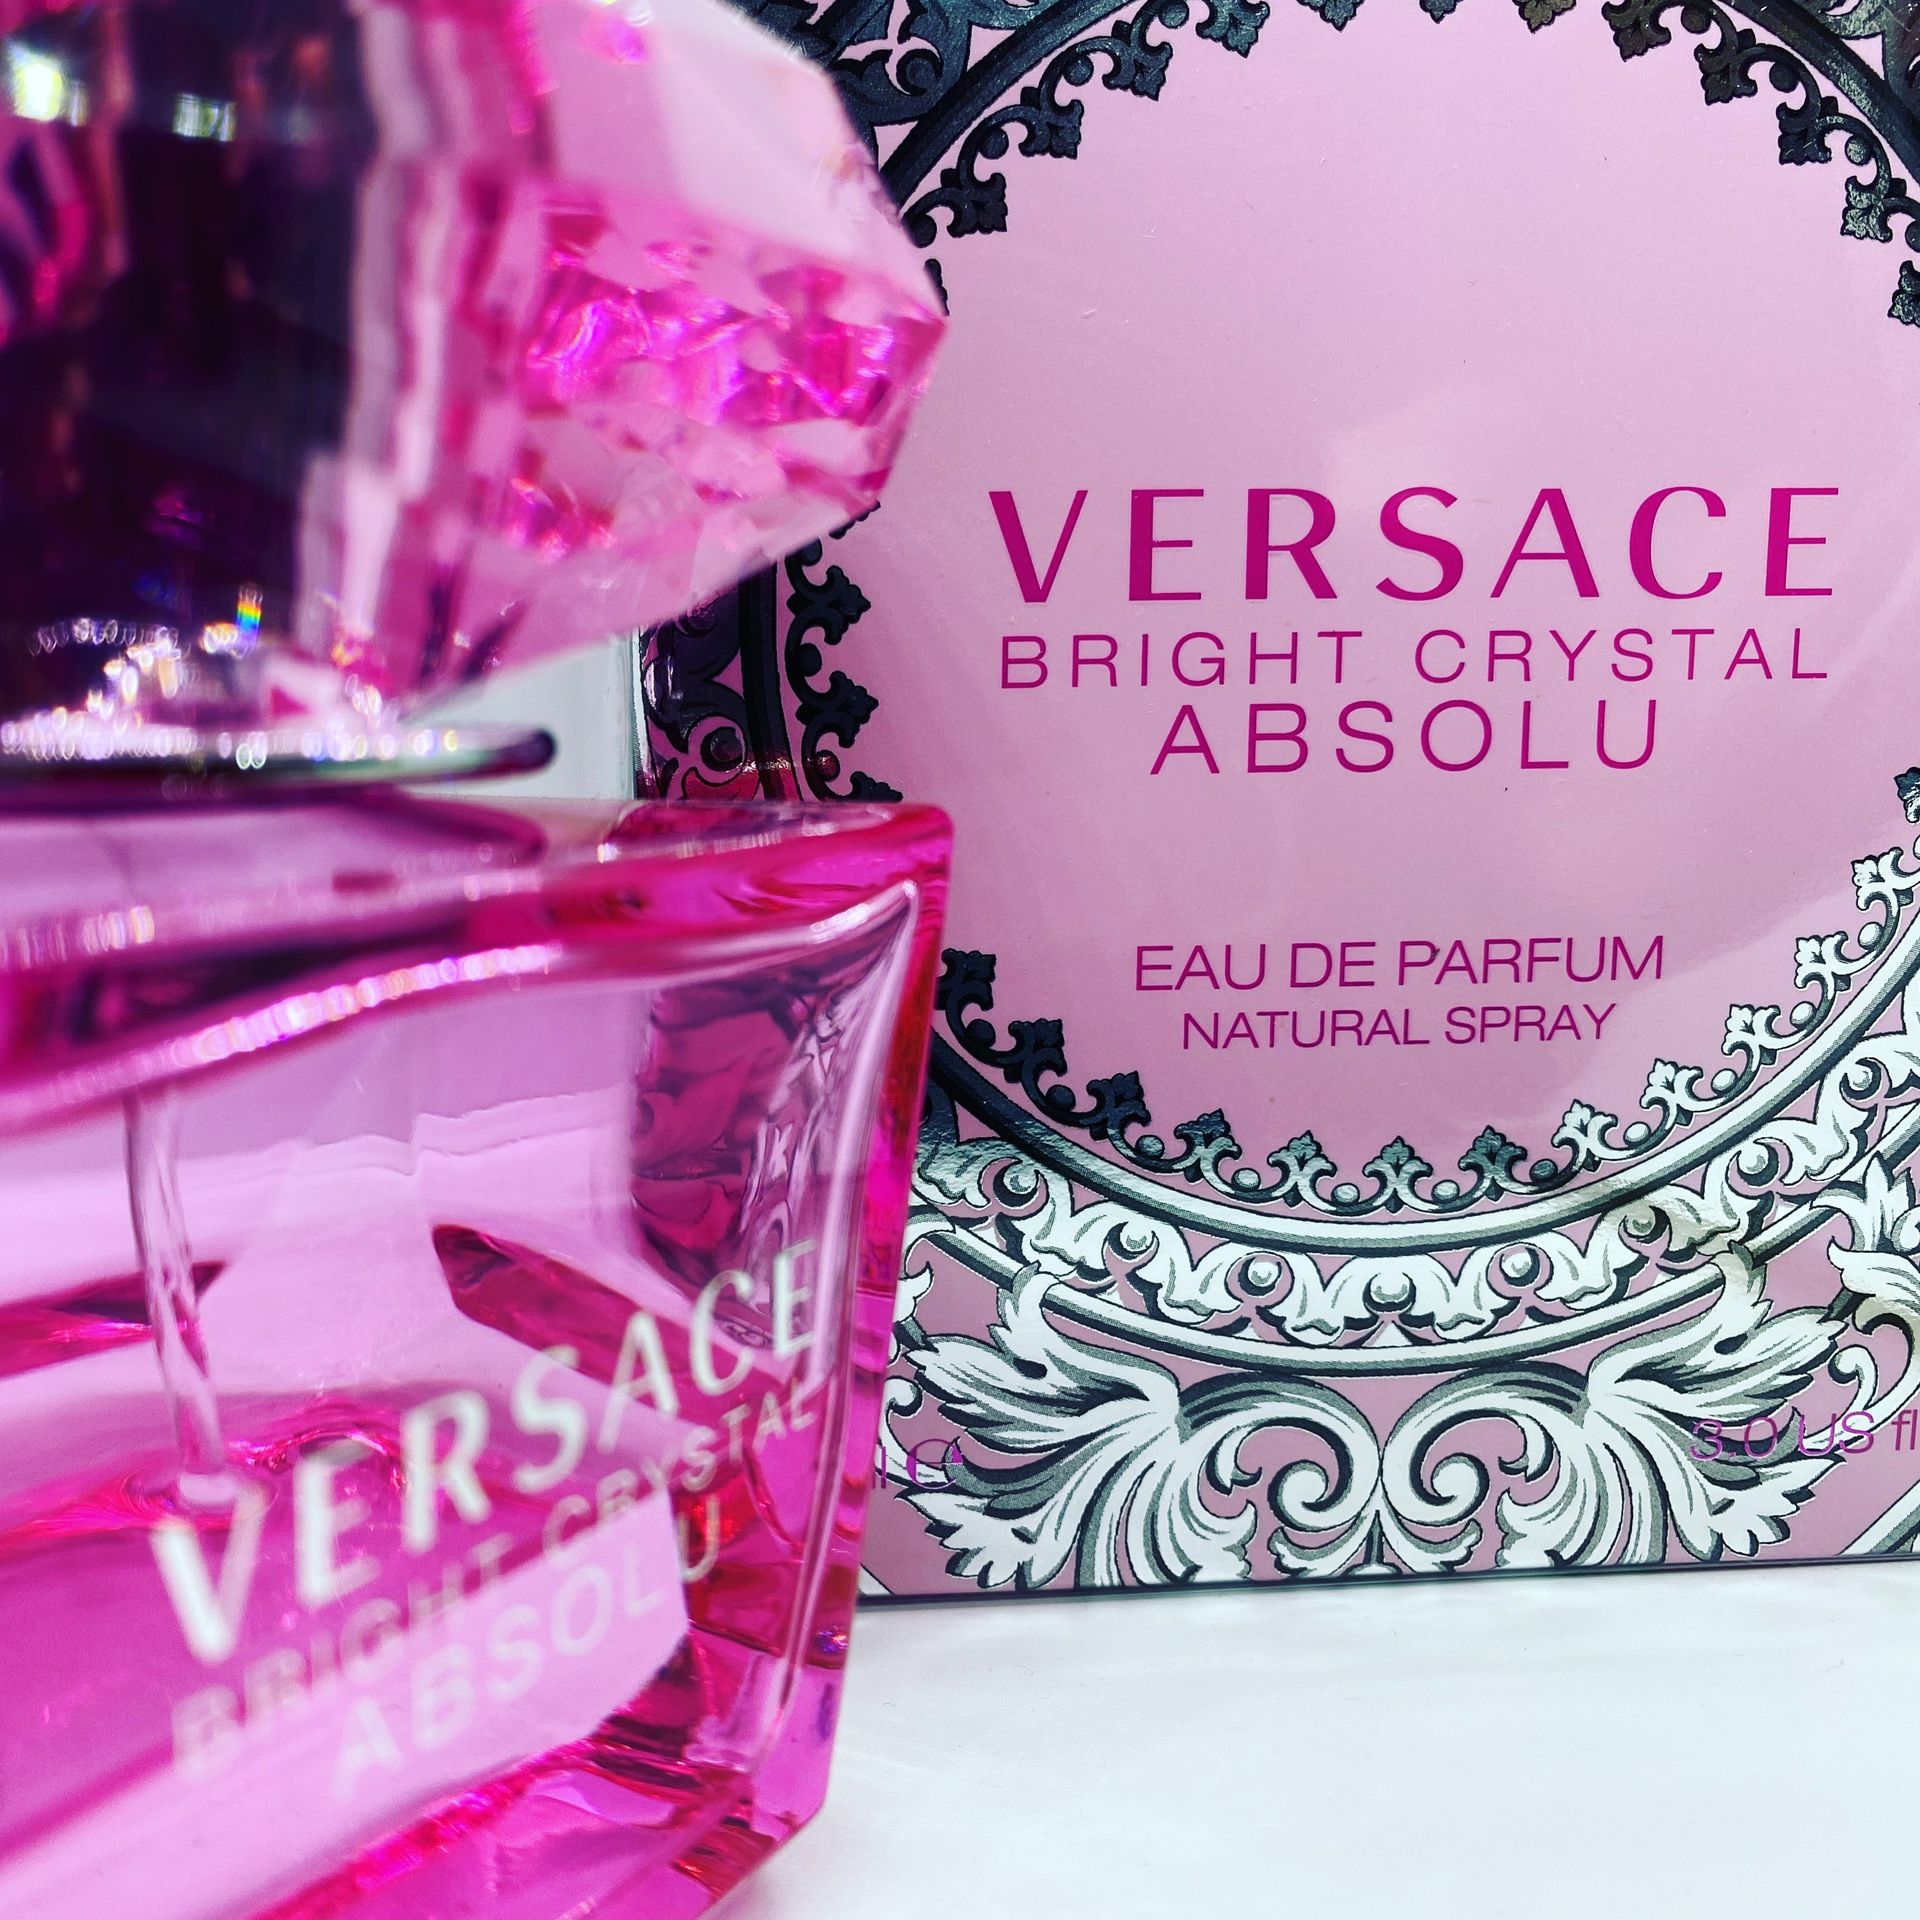 Available at Lucy’s Fragrance FONTANA indoor —-VERSACE—-absolute 3.0